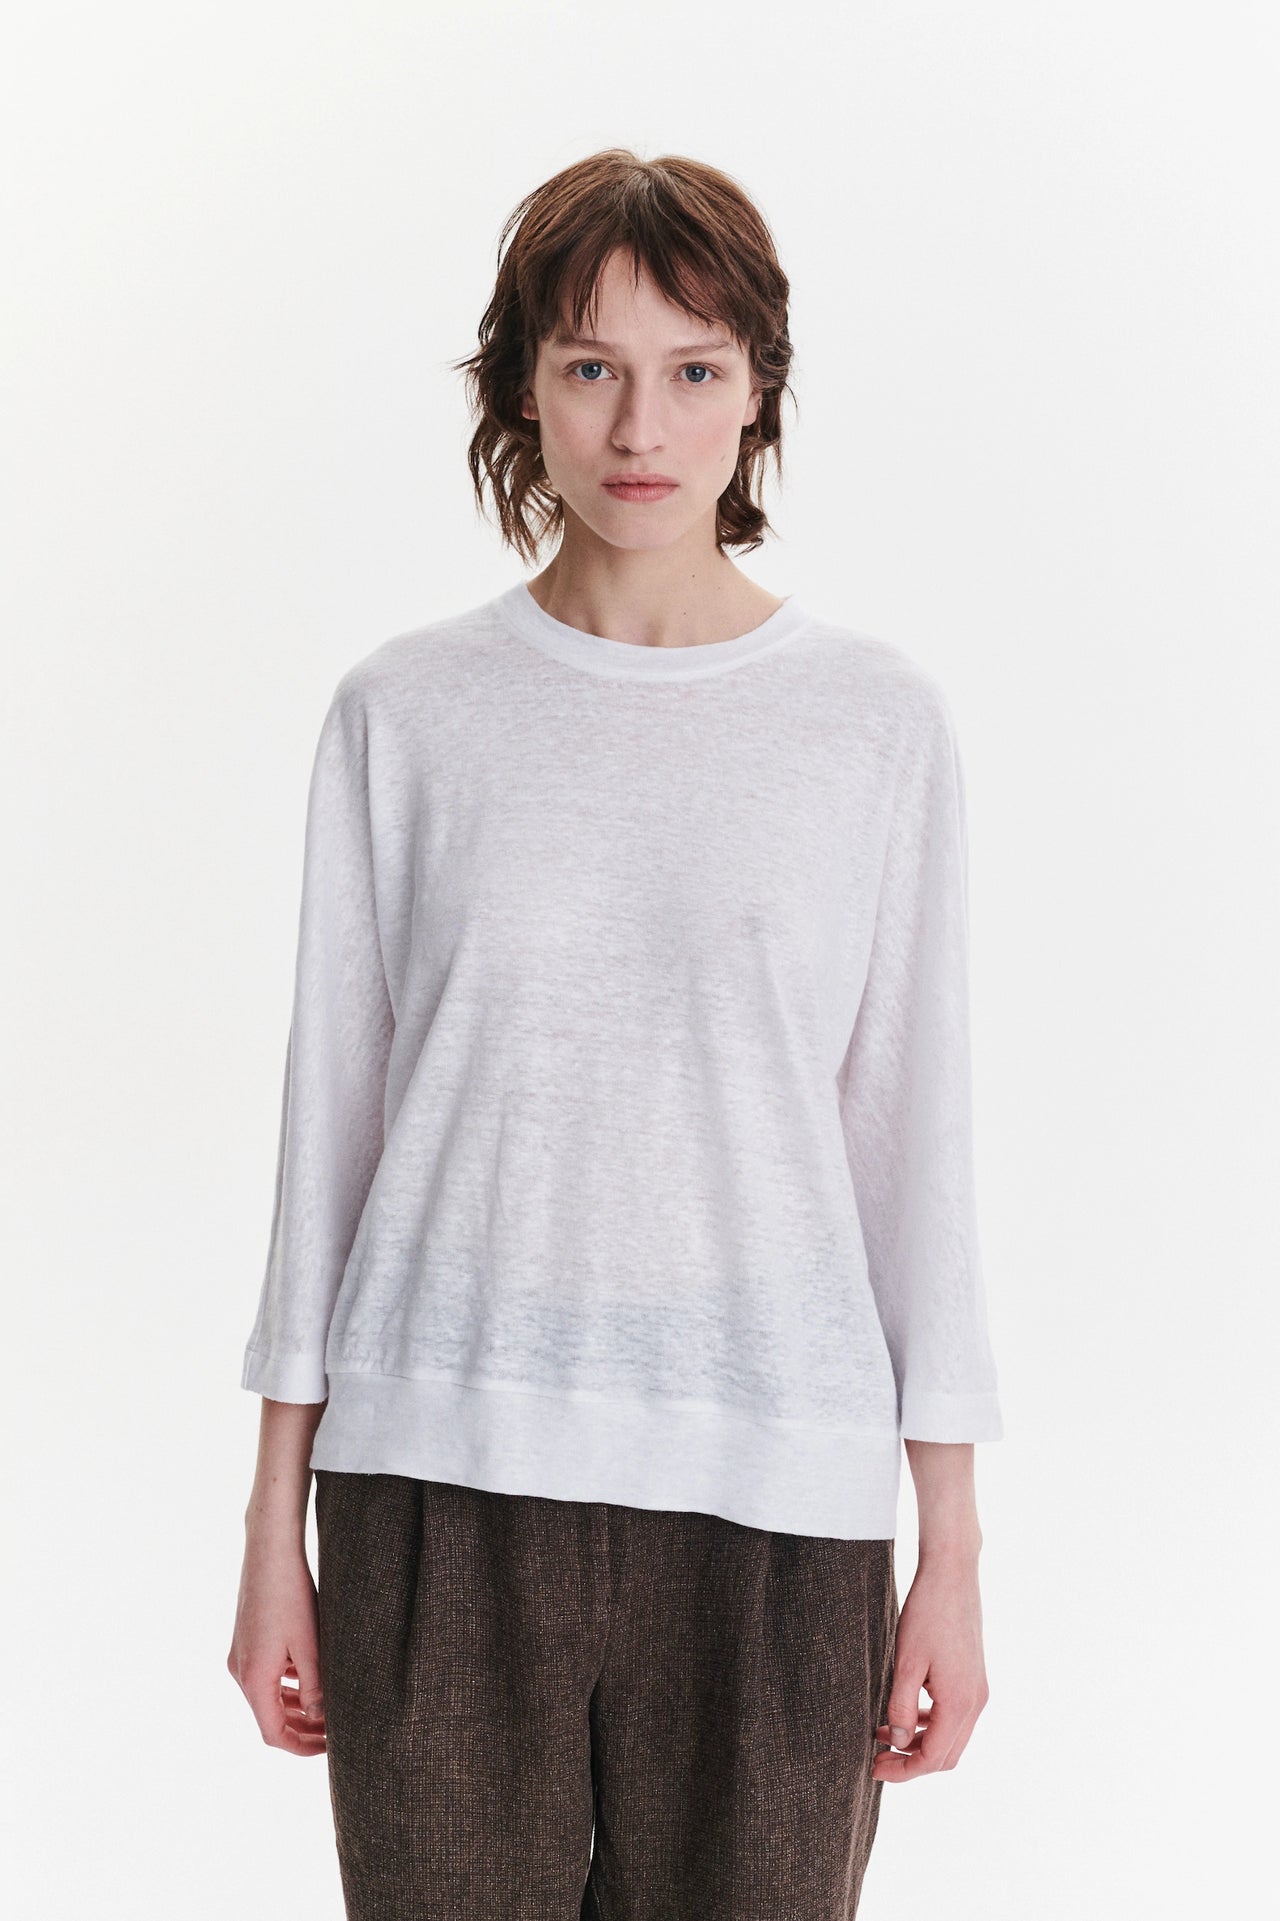 Threequarter Sleeve Top in the Finest White Lithuanian Linen Jersey